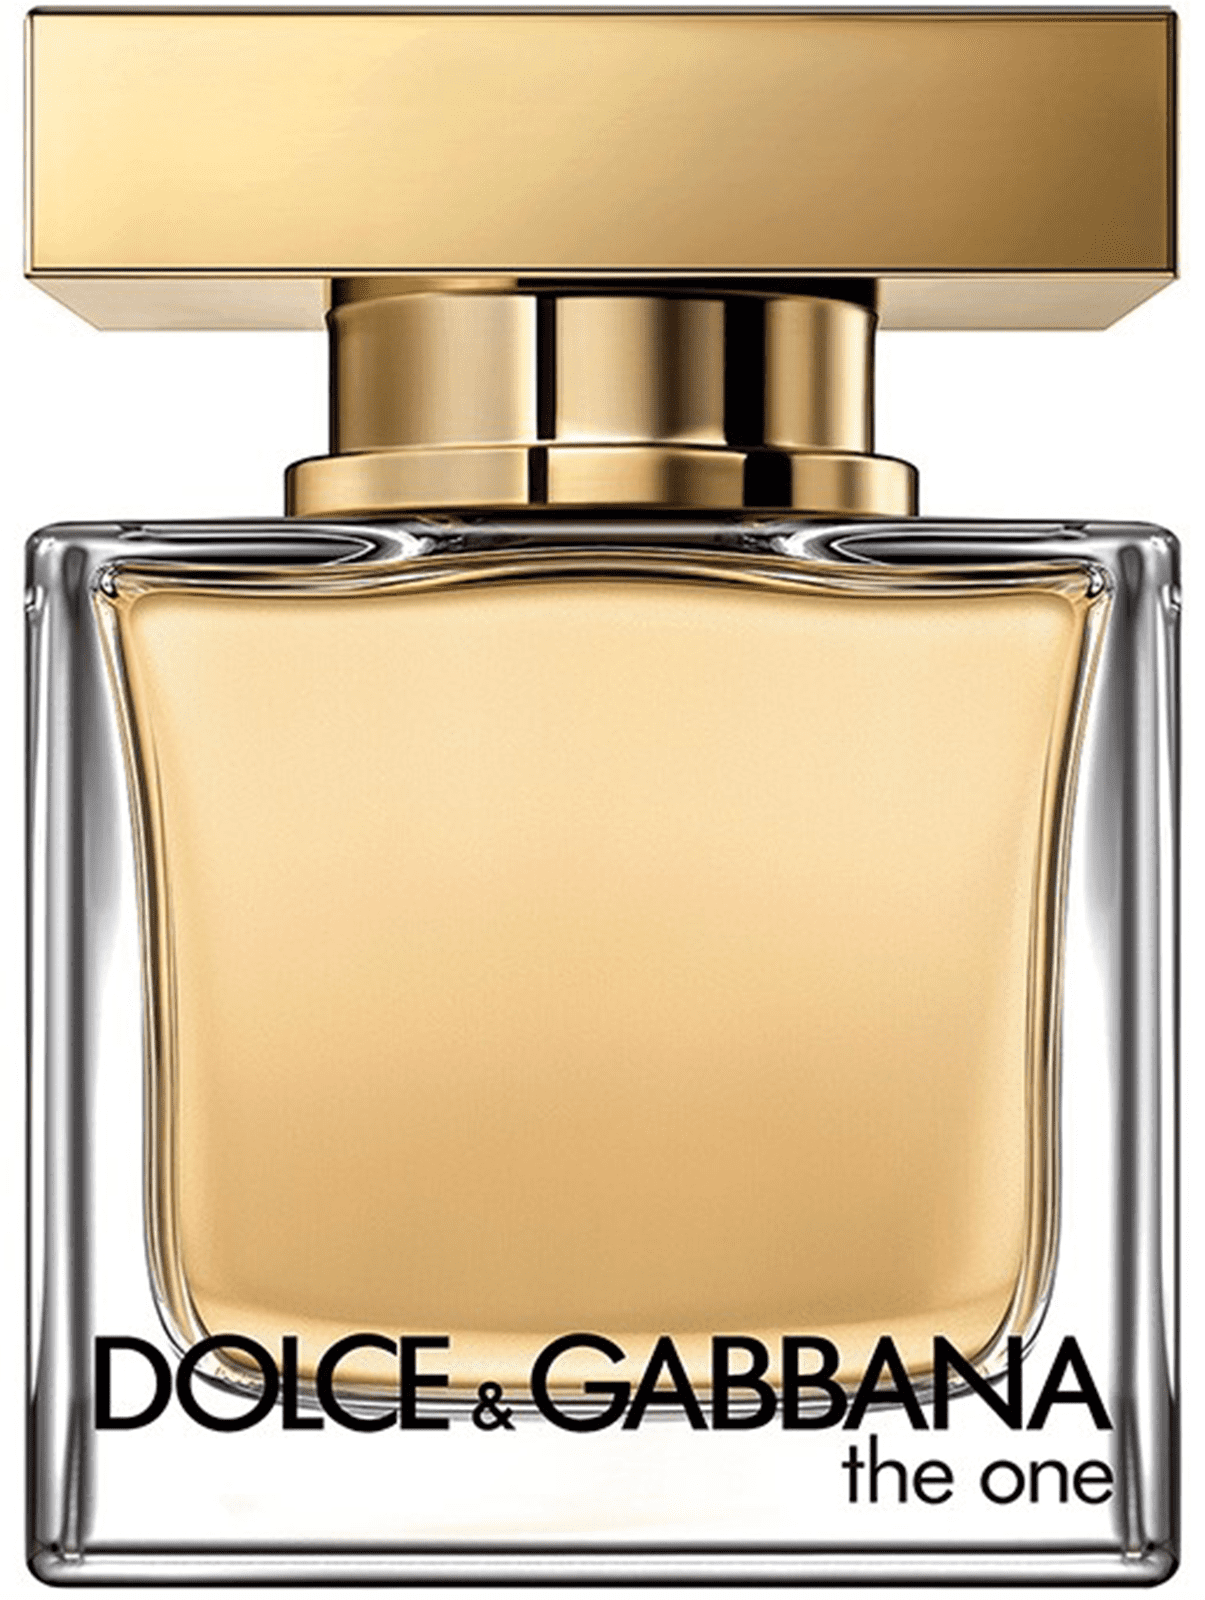 Dolce gabbana the one for woman. Дольче Габбана the one 30 ml. Дольче Габбана the one 100. Dolce Gabbana the one 100 мл. Dolce Gabbana the one for women EDT 100 ml.